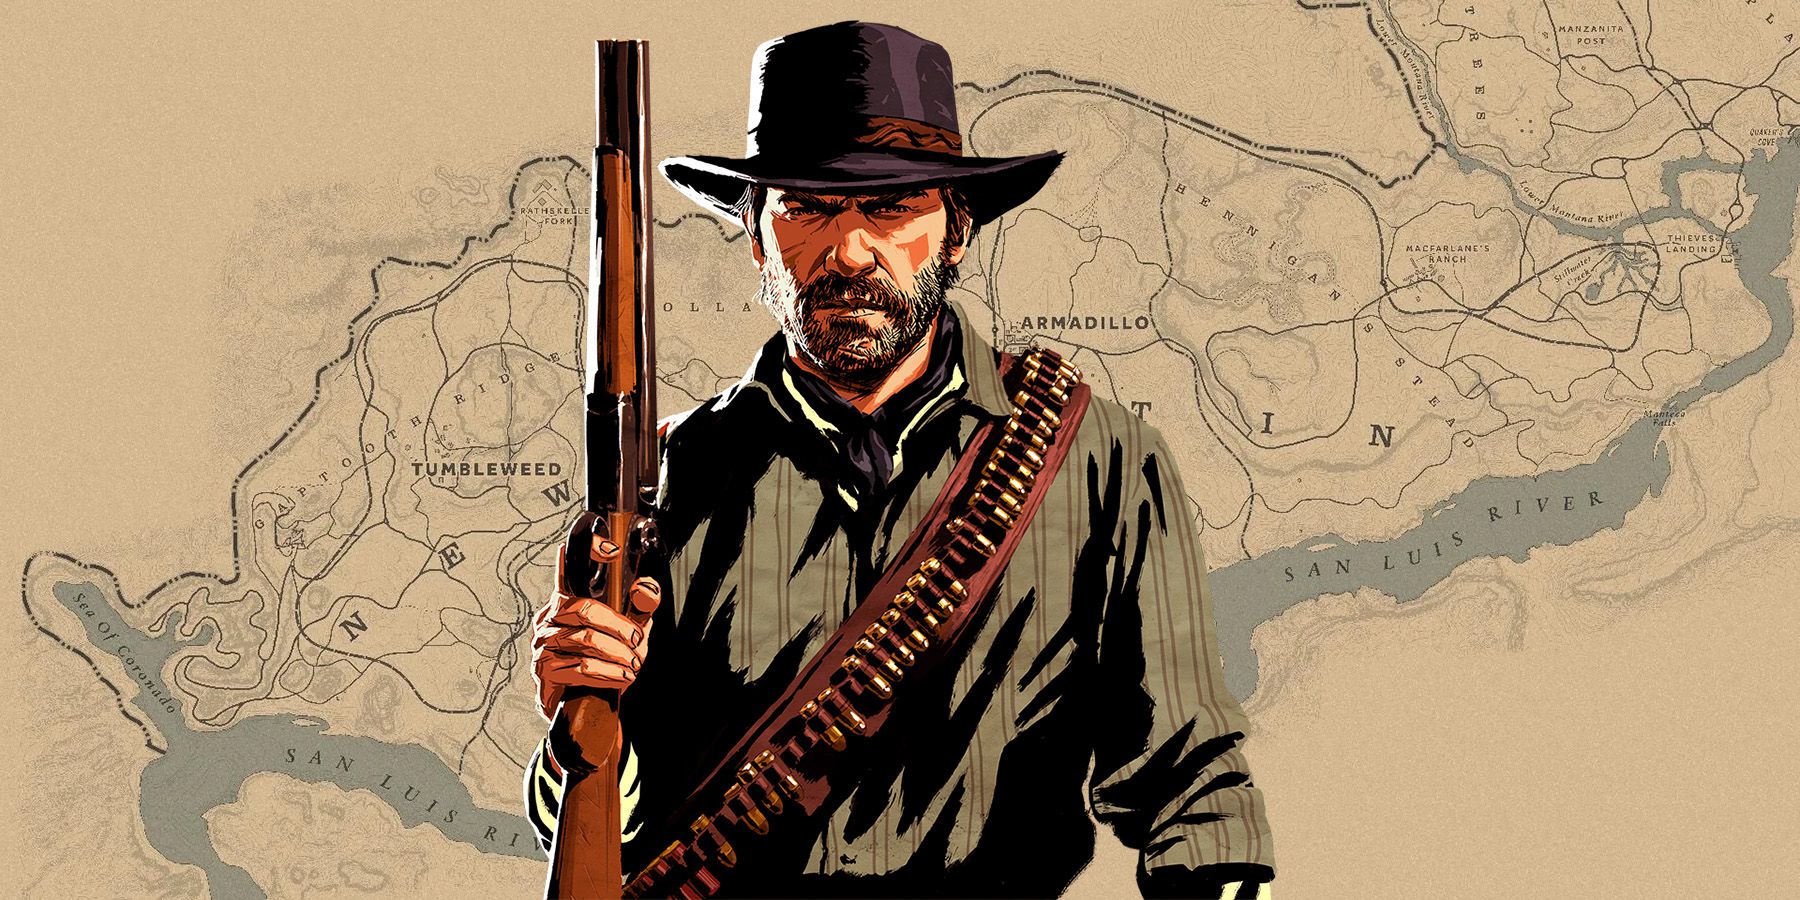 Red Dead Redemption 2's Arthur Morgan in front of New Austin's map.